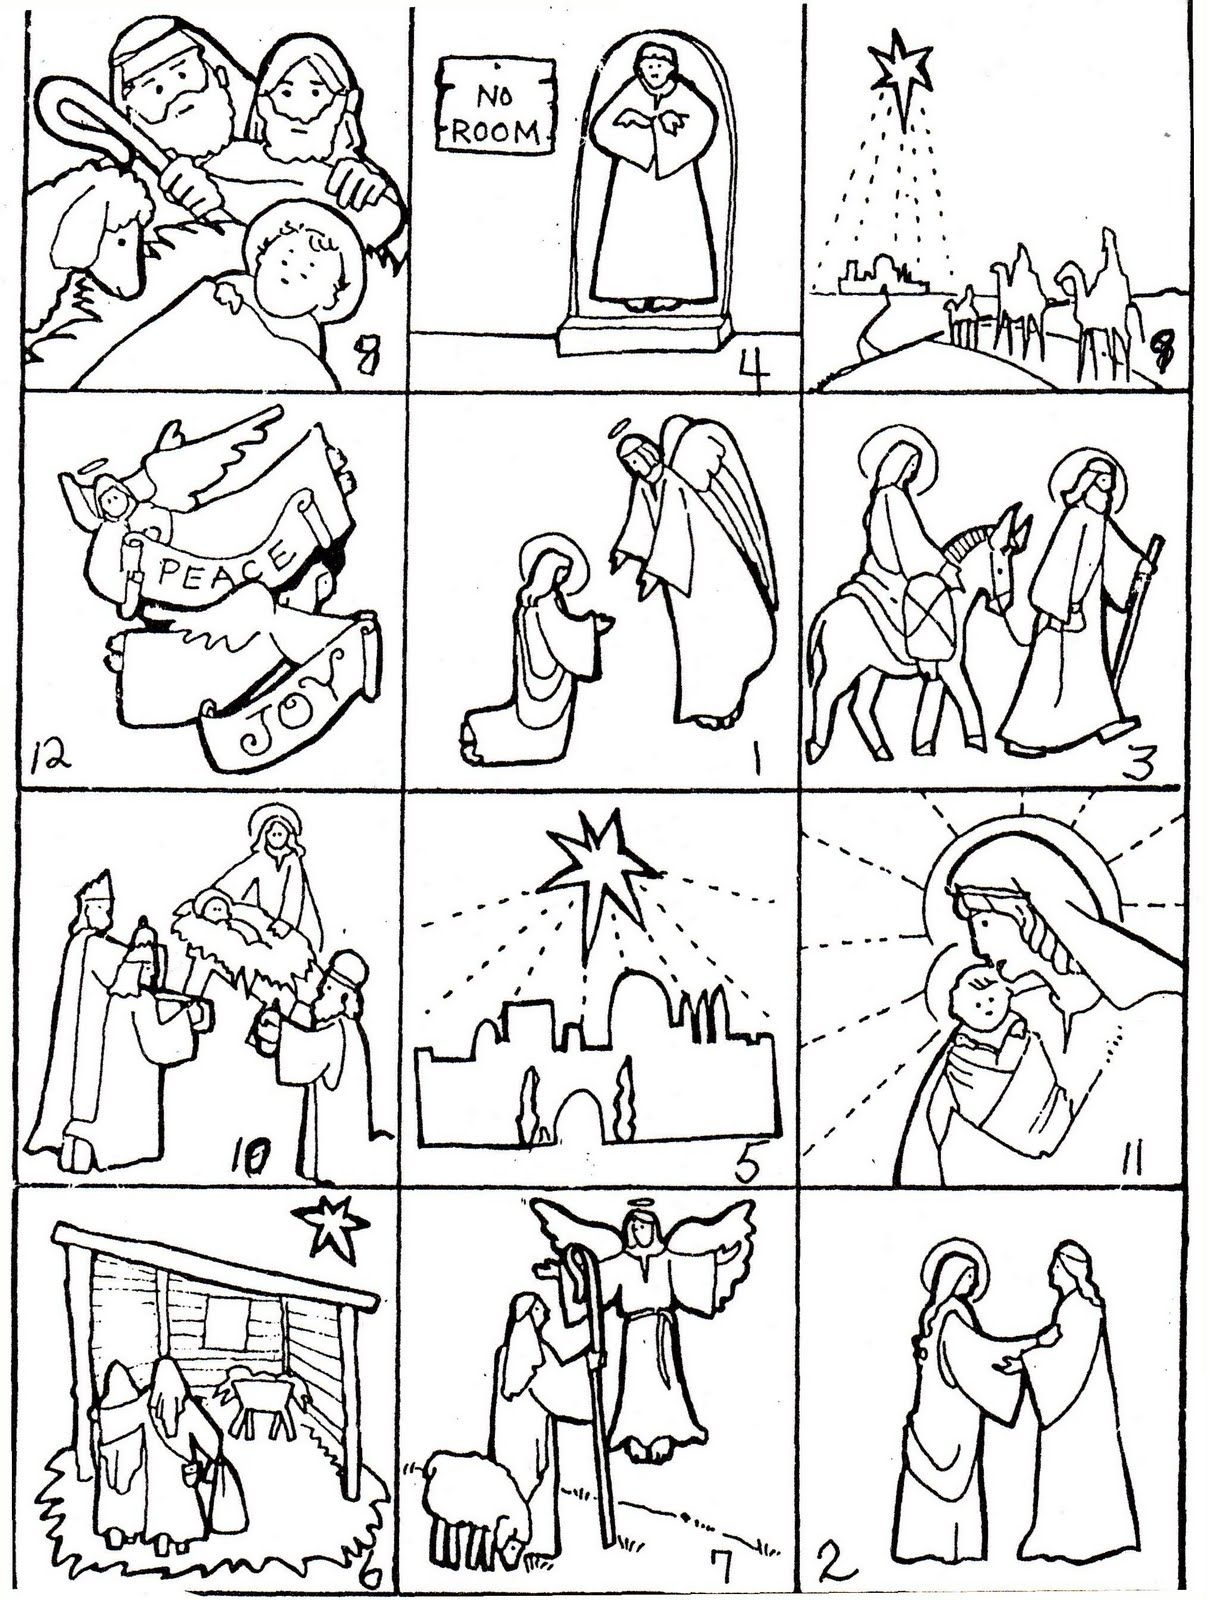 Fun Christmas Story Sequence And Writing Activities For Elementary School Enrichment